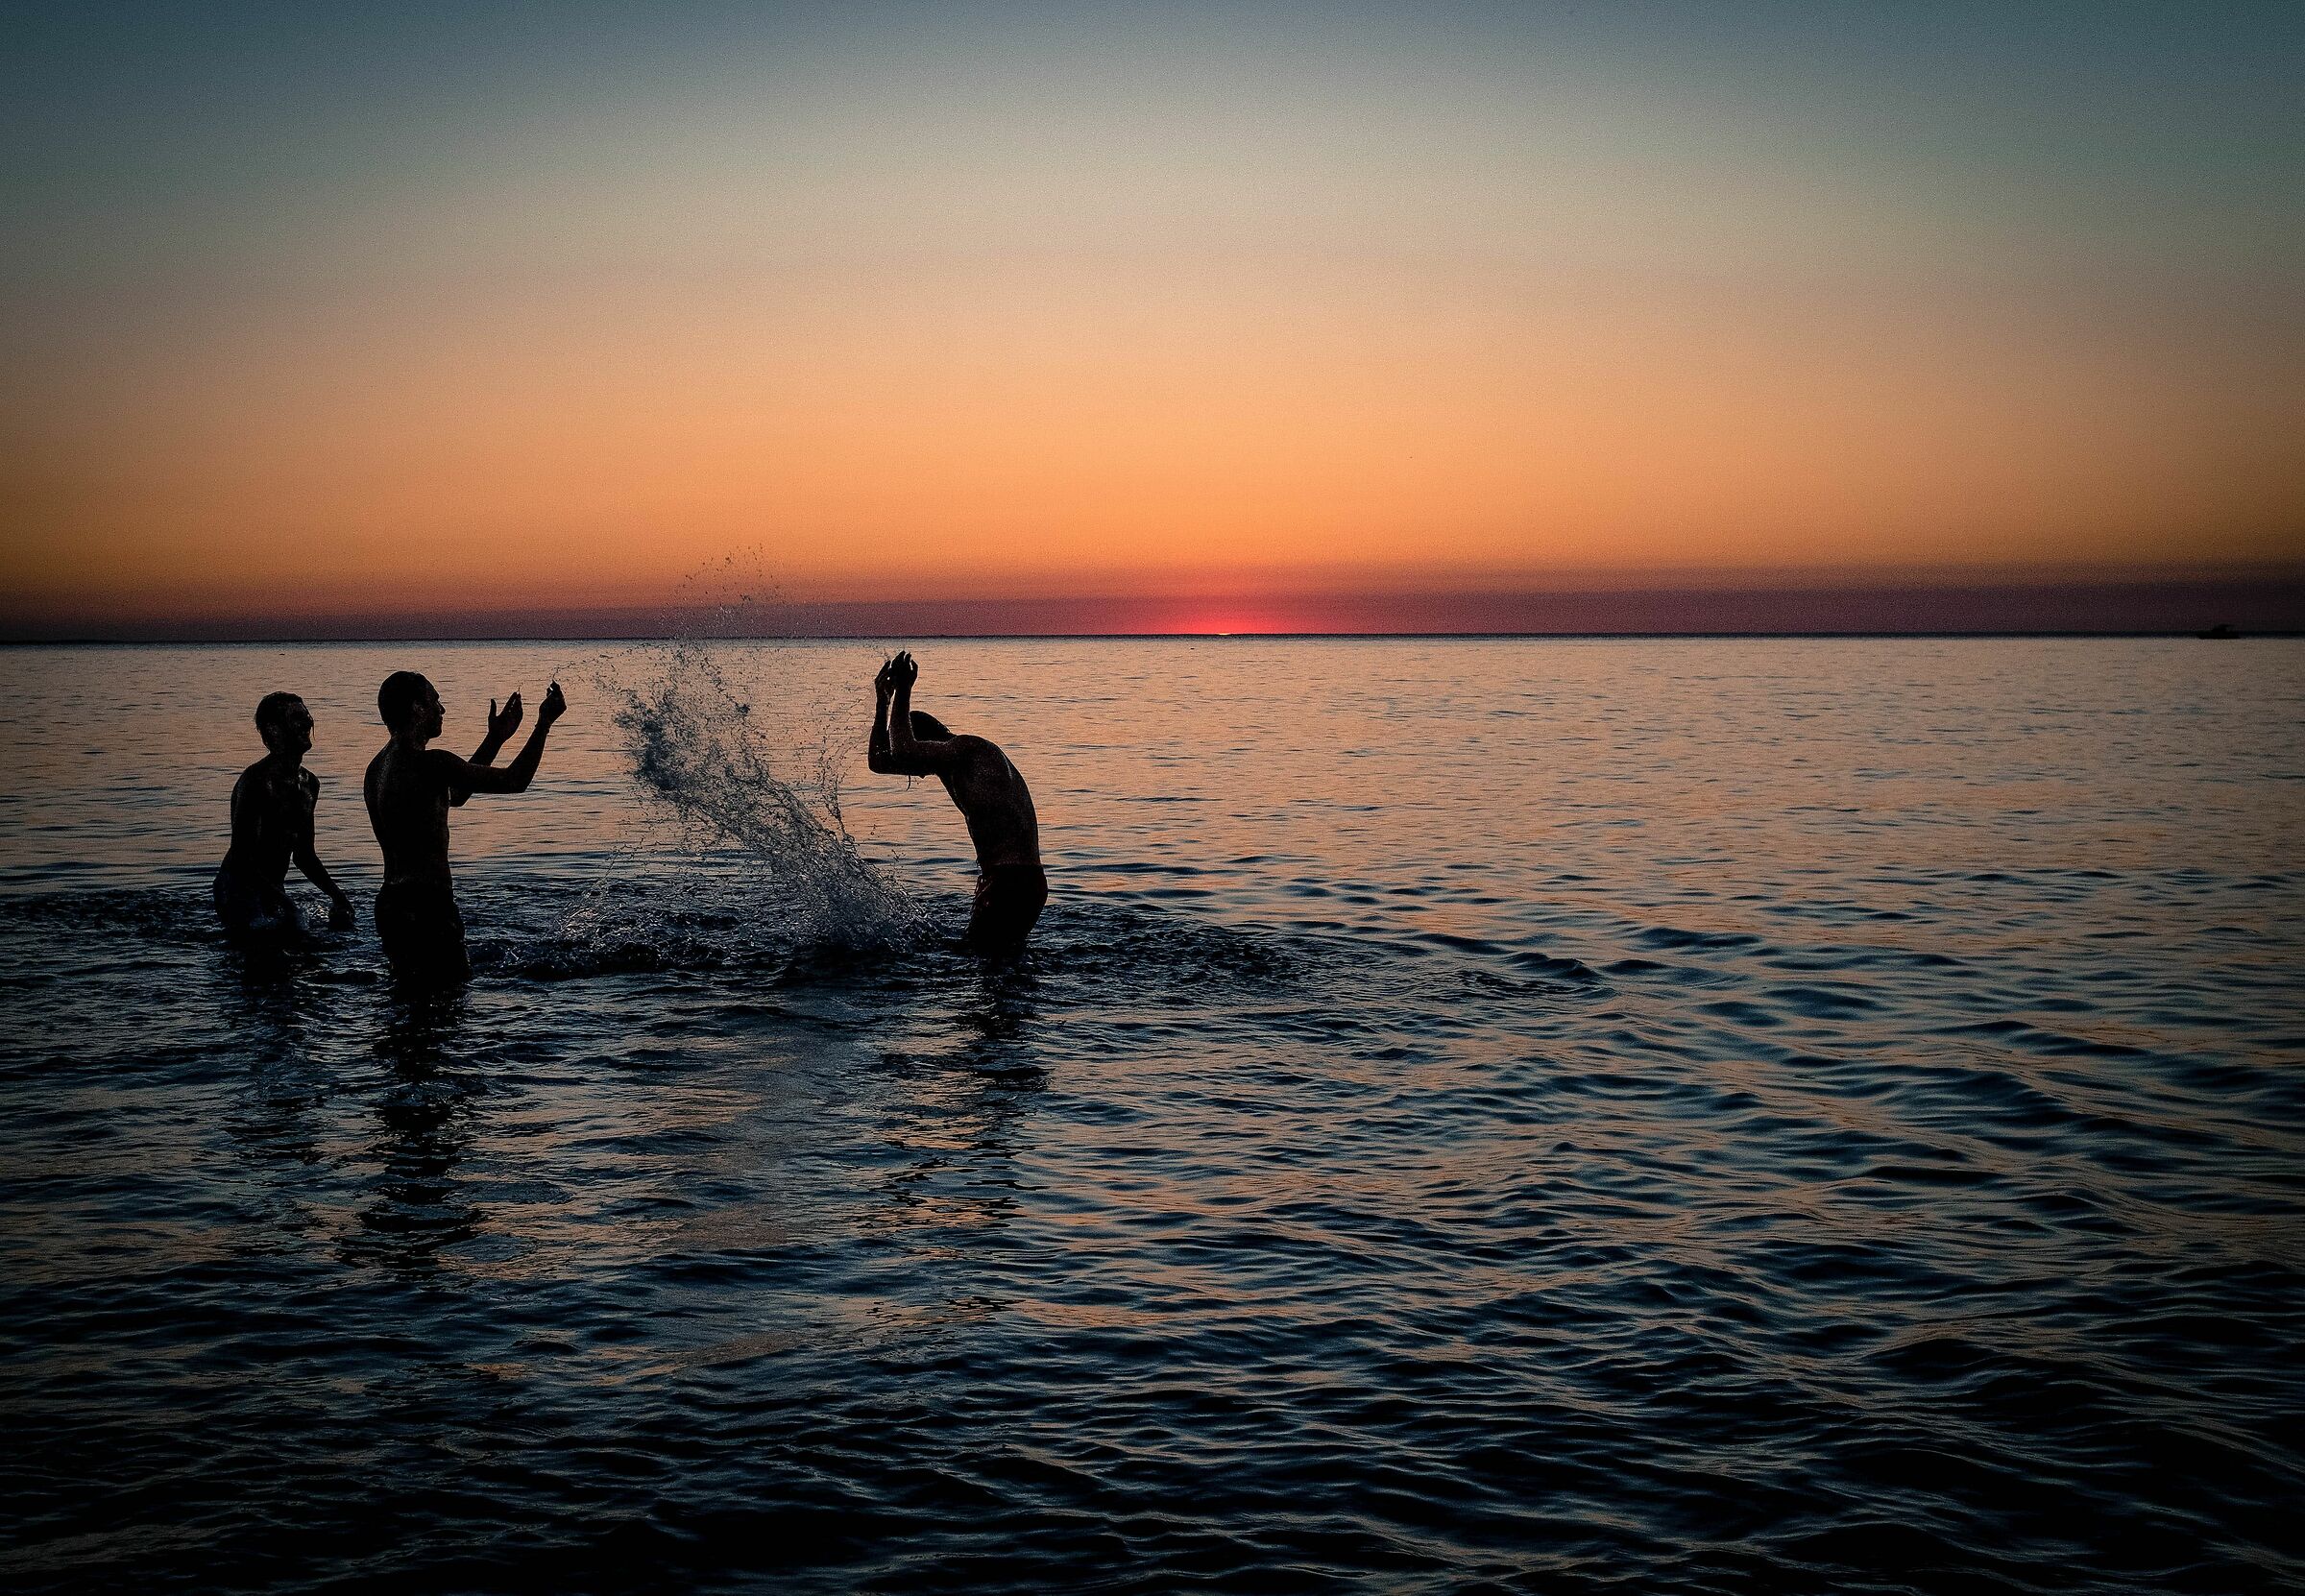 Playing with the water at sunset ...